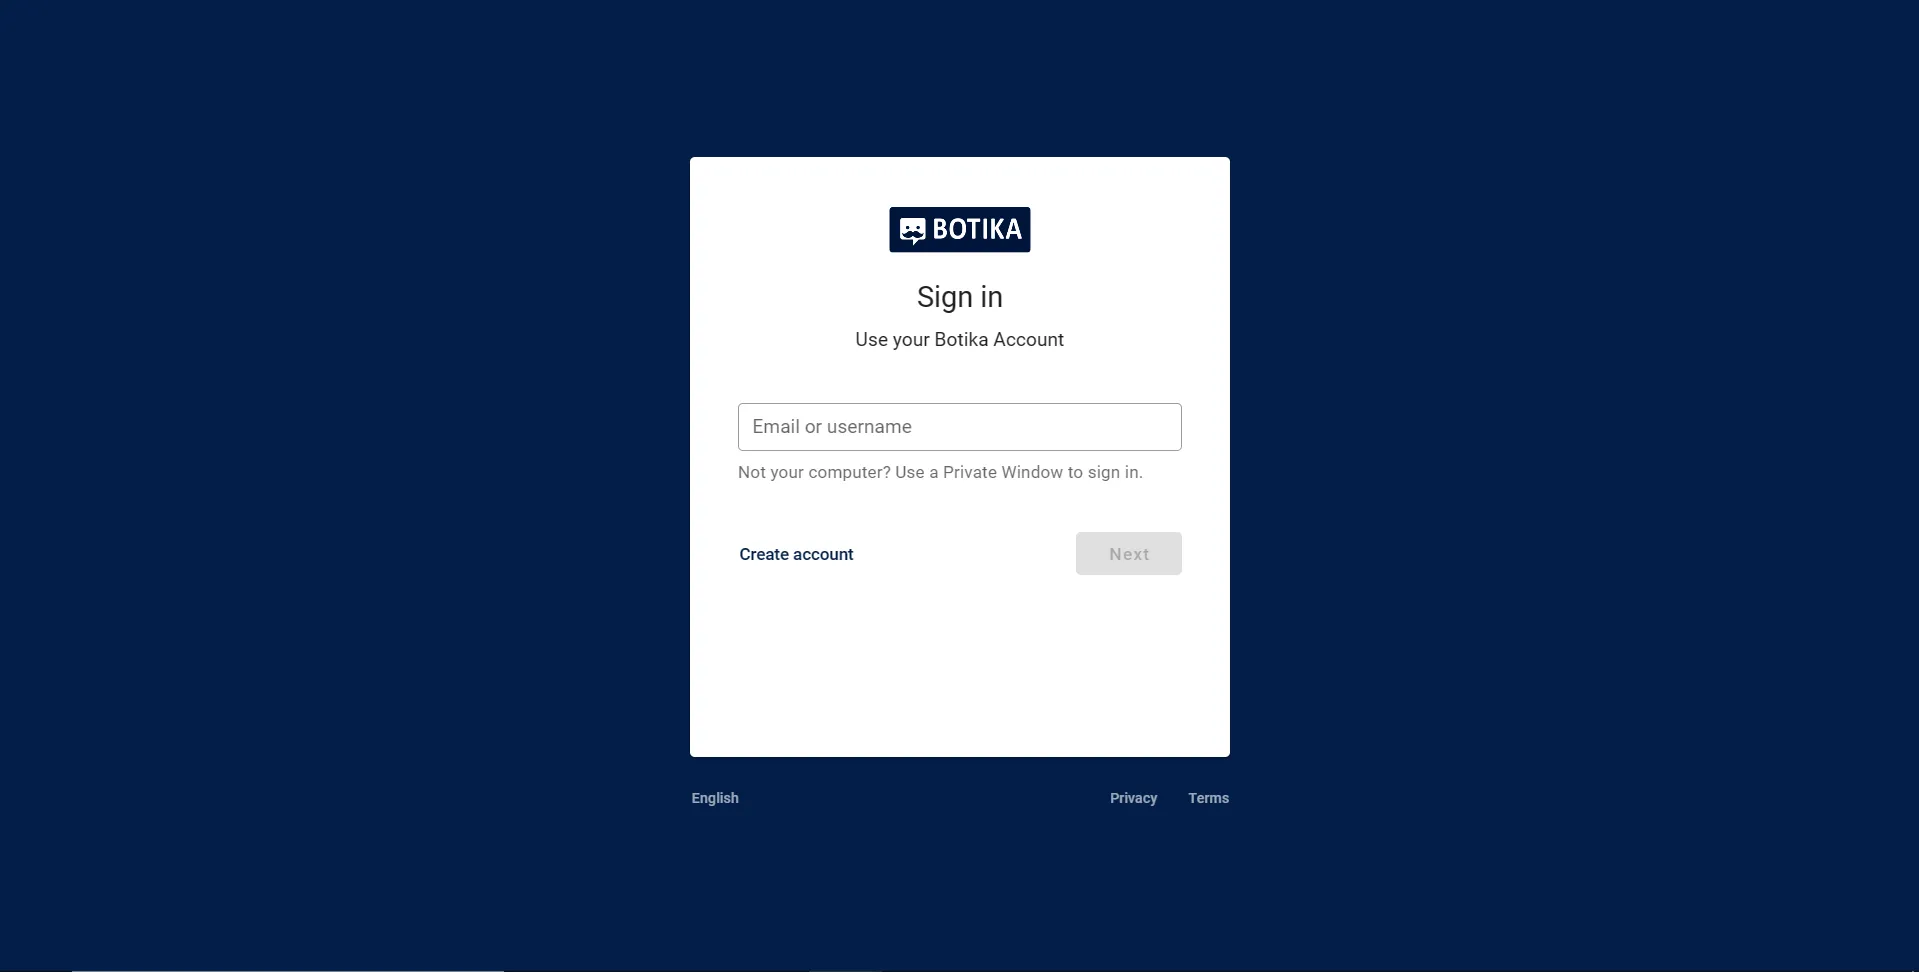 Step 1: Enter your login credentials on the login page